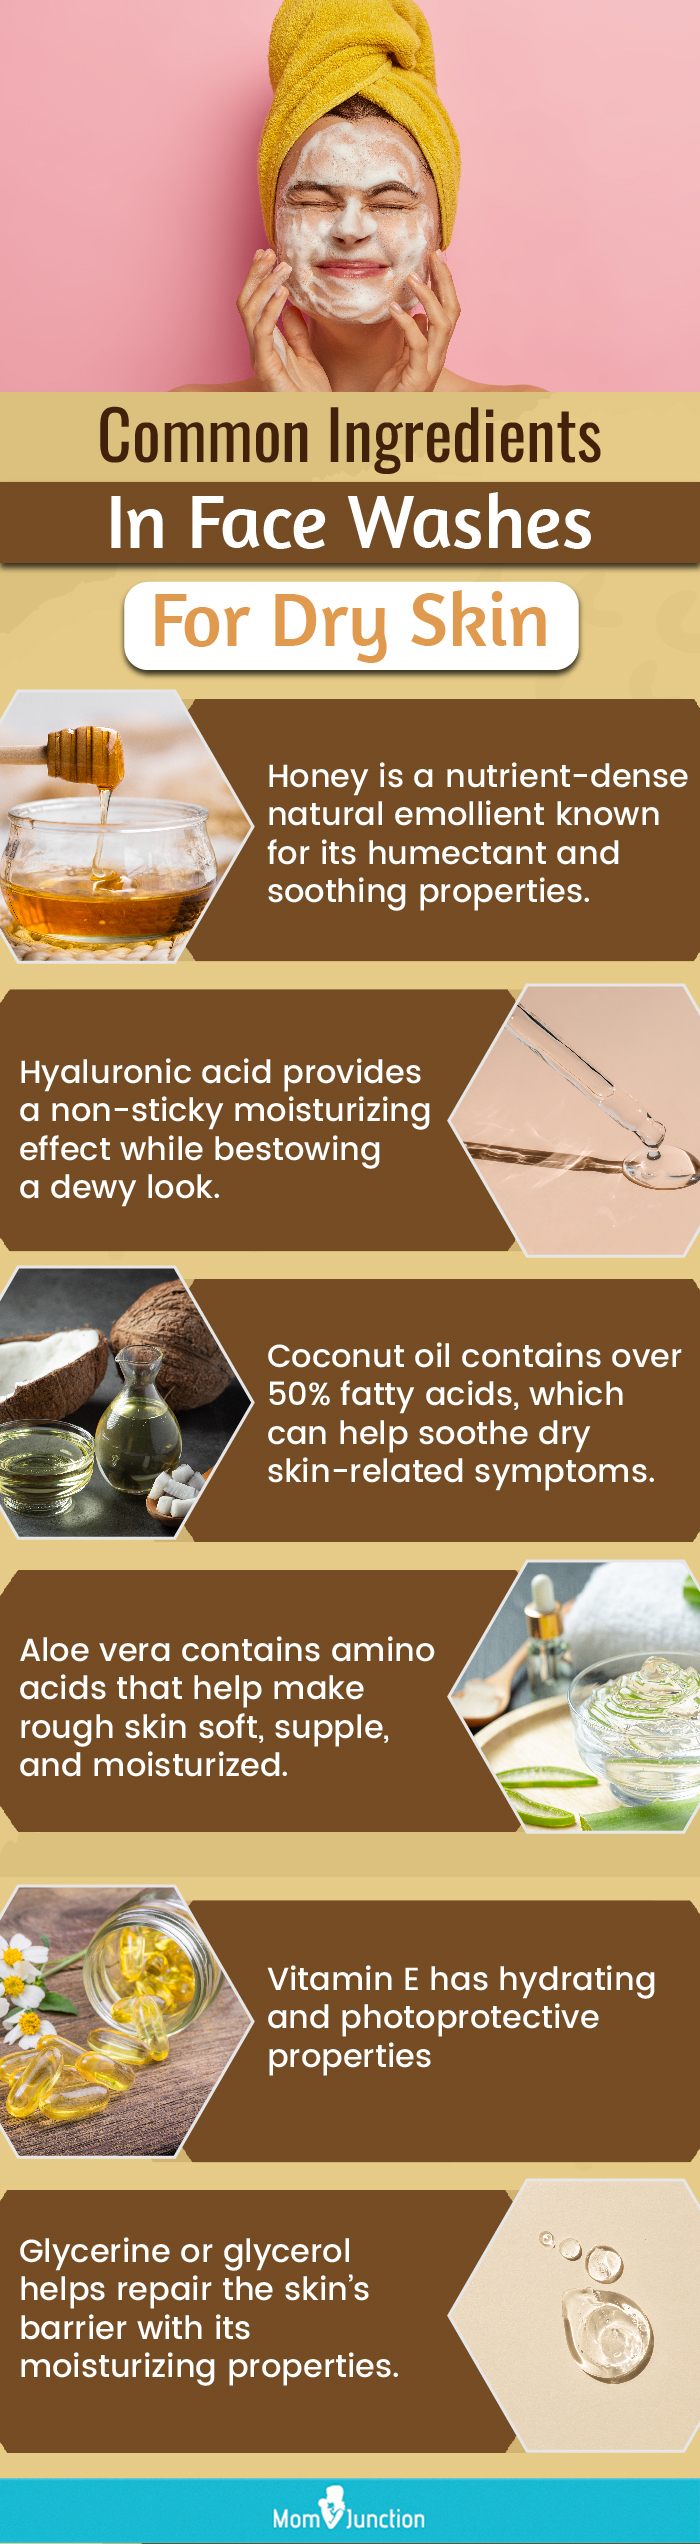 Common Ingredients In Face Washes For Dry Skin (infographic)